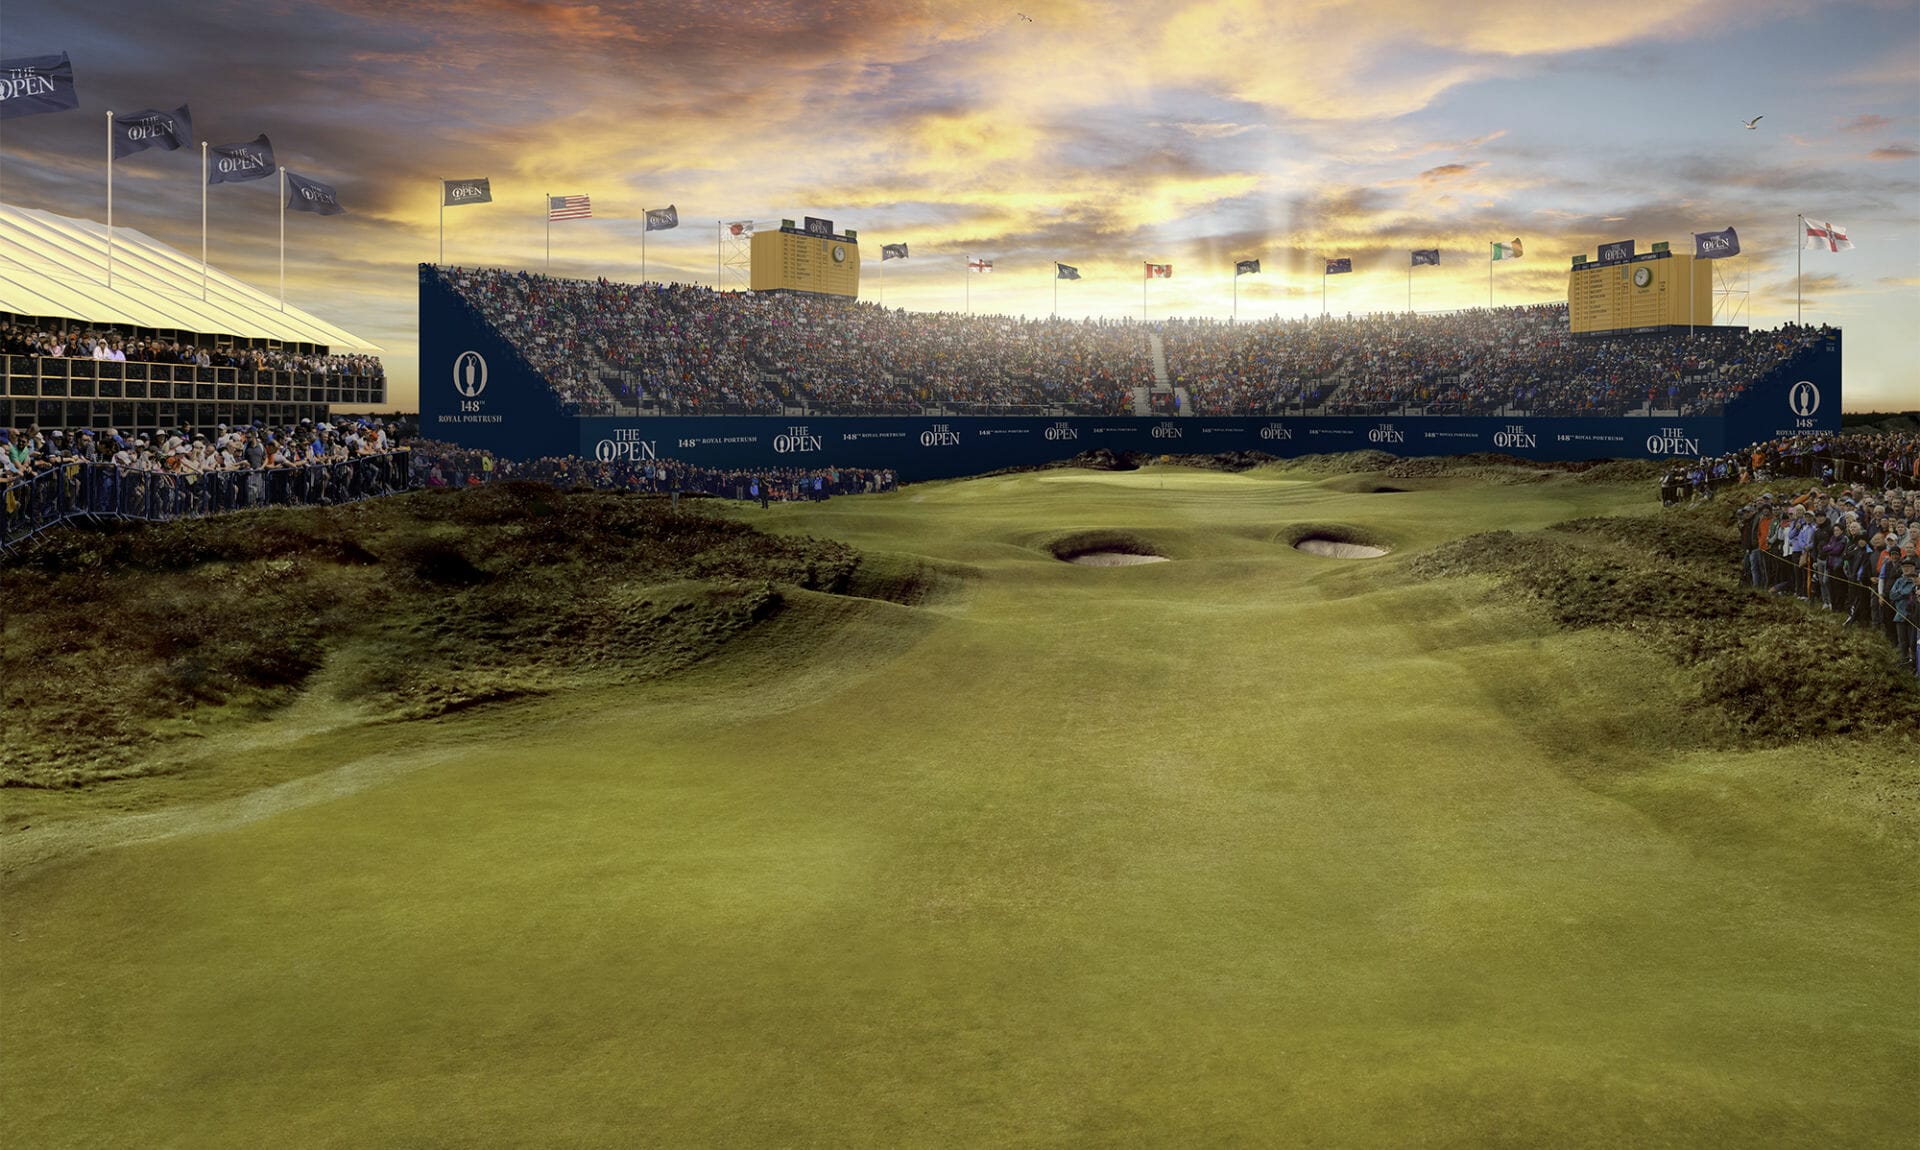 Get inside the ropes at Royal Portrush with American Golf